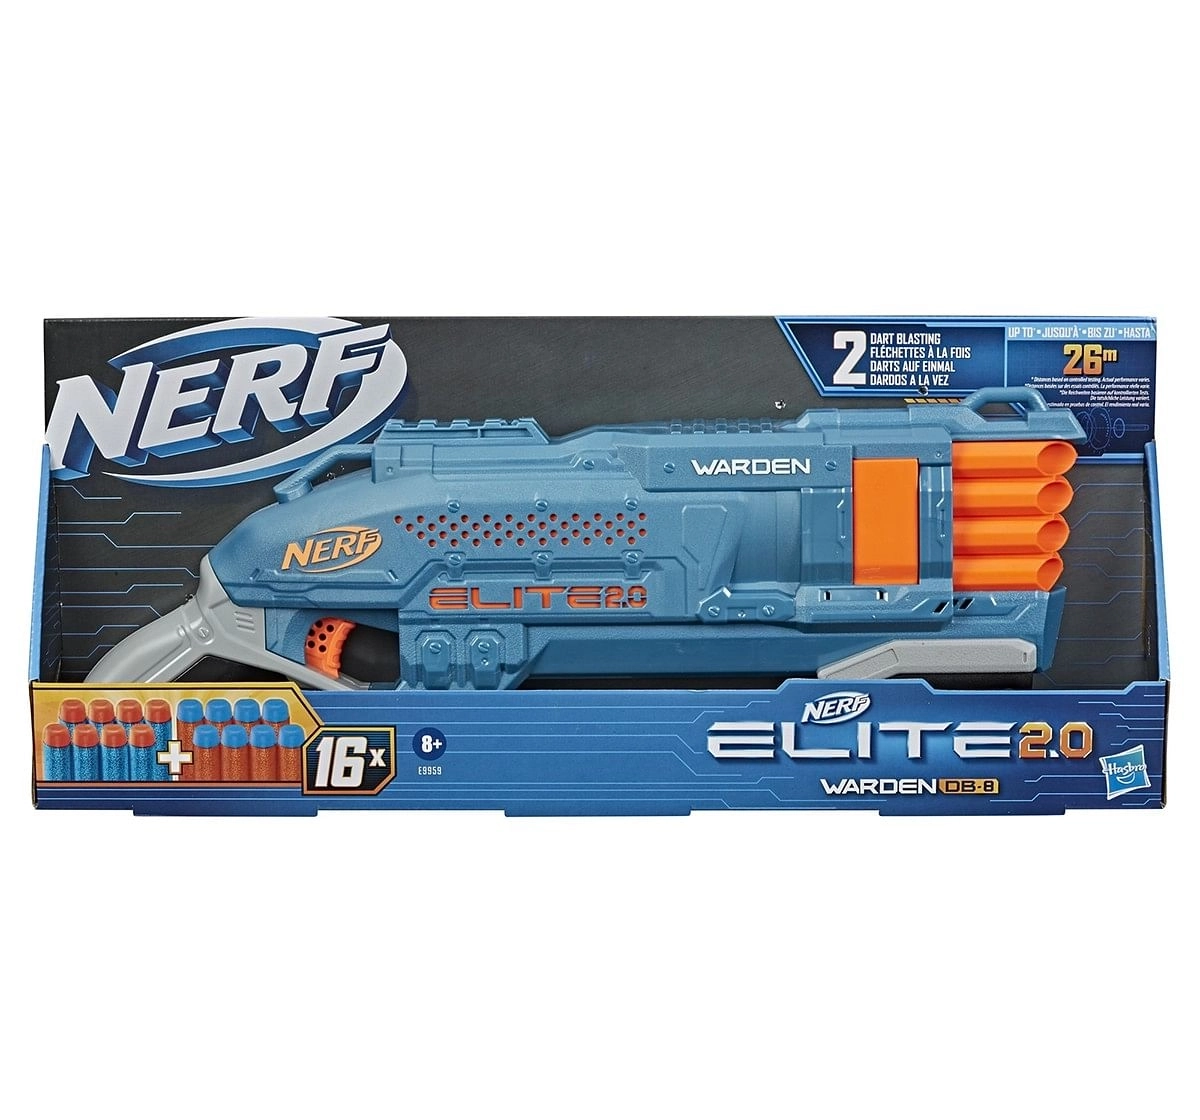 NERF Elite 2.0 Warden DB-8 Blaster Tactical Rail For Customizing Capability, Multicolor, 8Y+ 